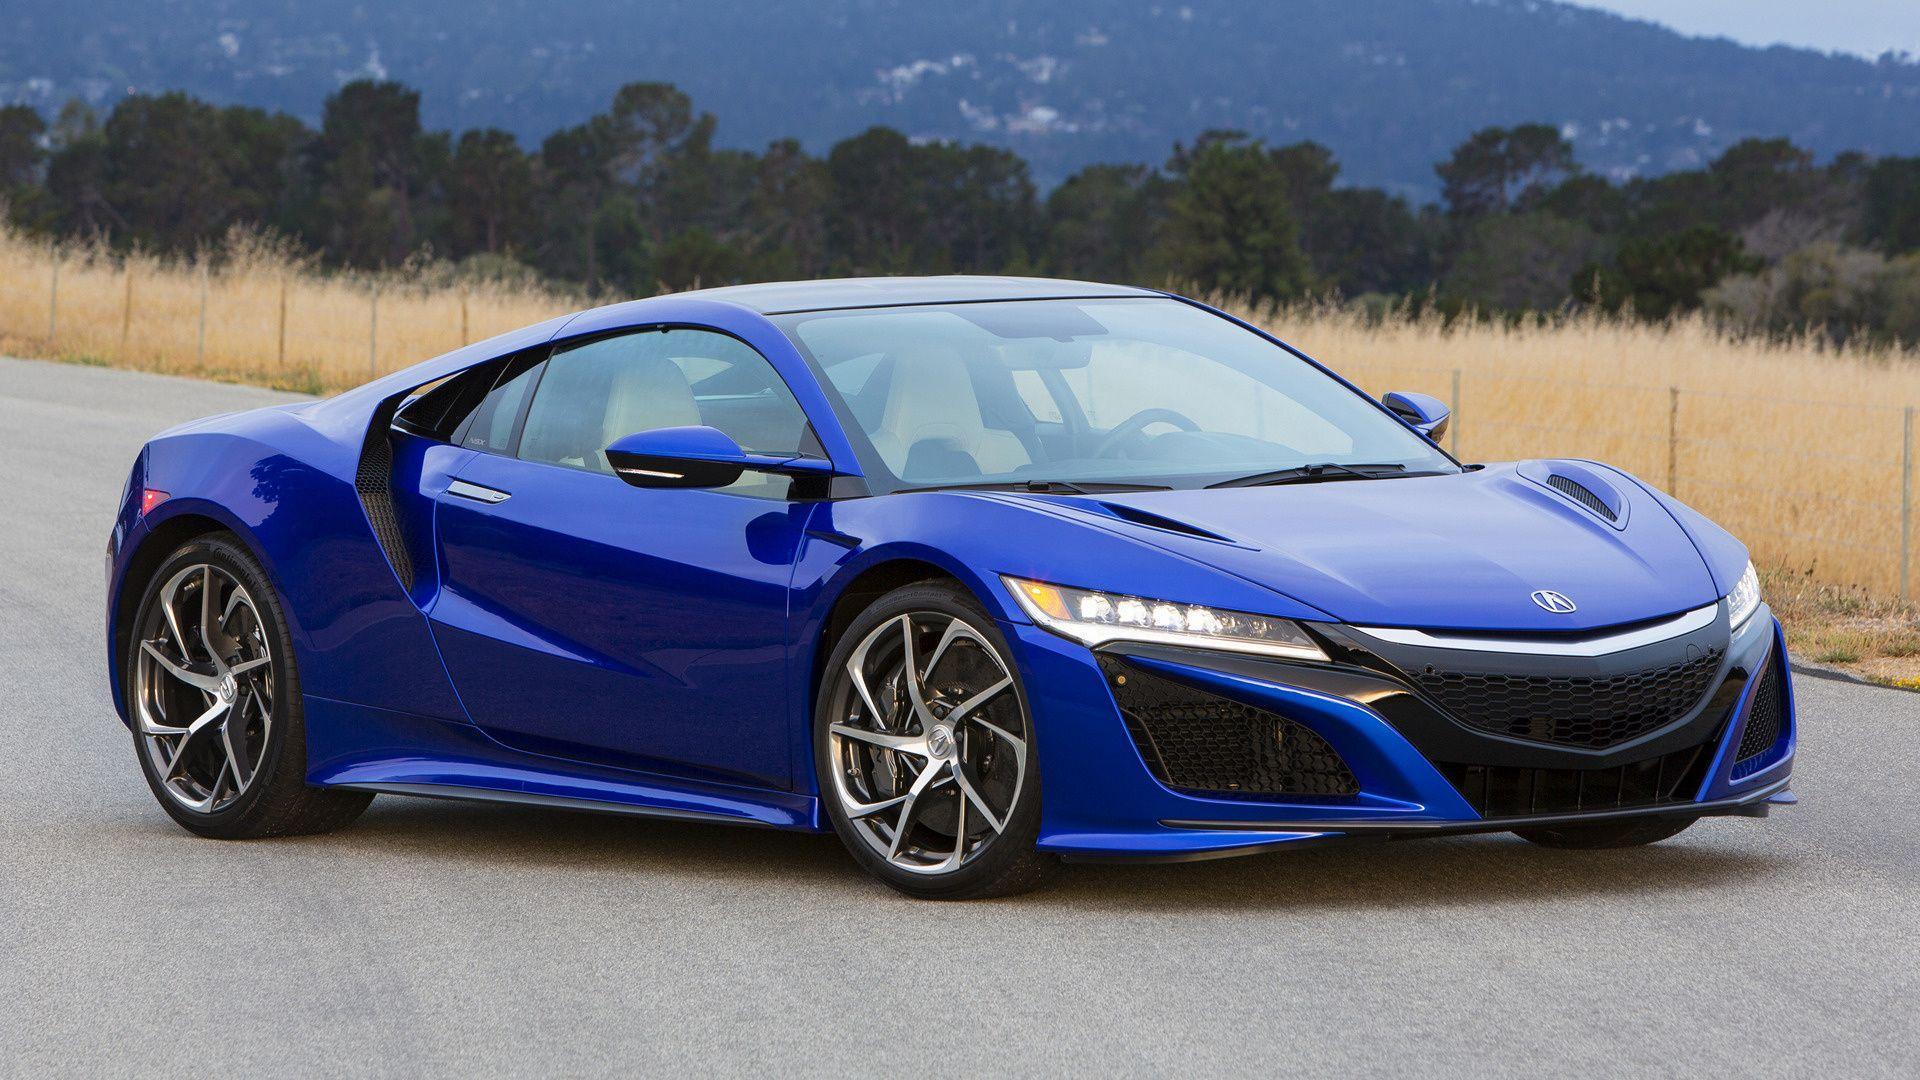 Acura NSX (2017) Wallpaper and HD Image